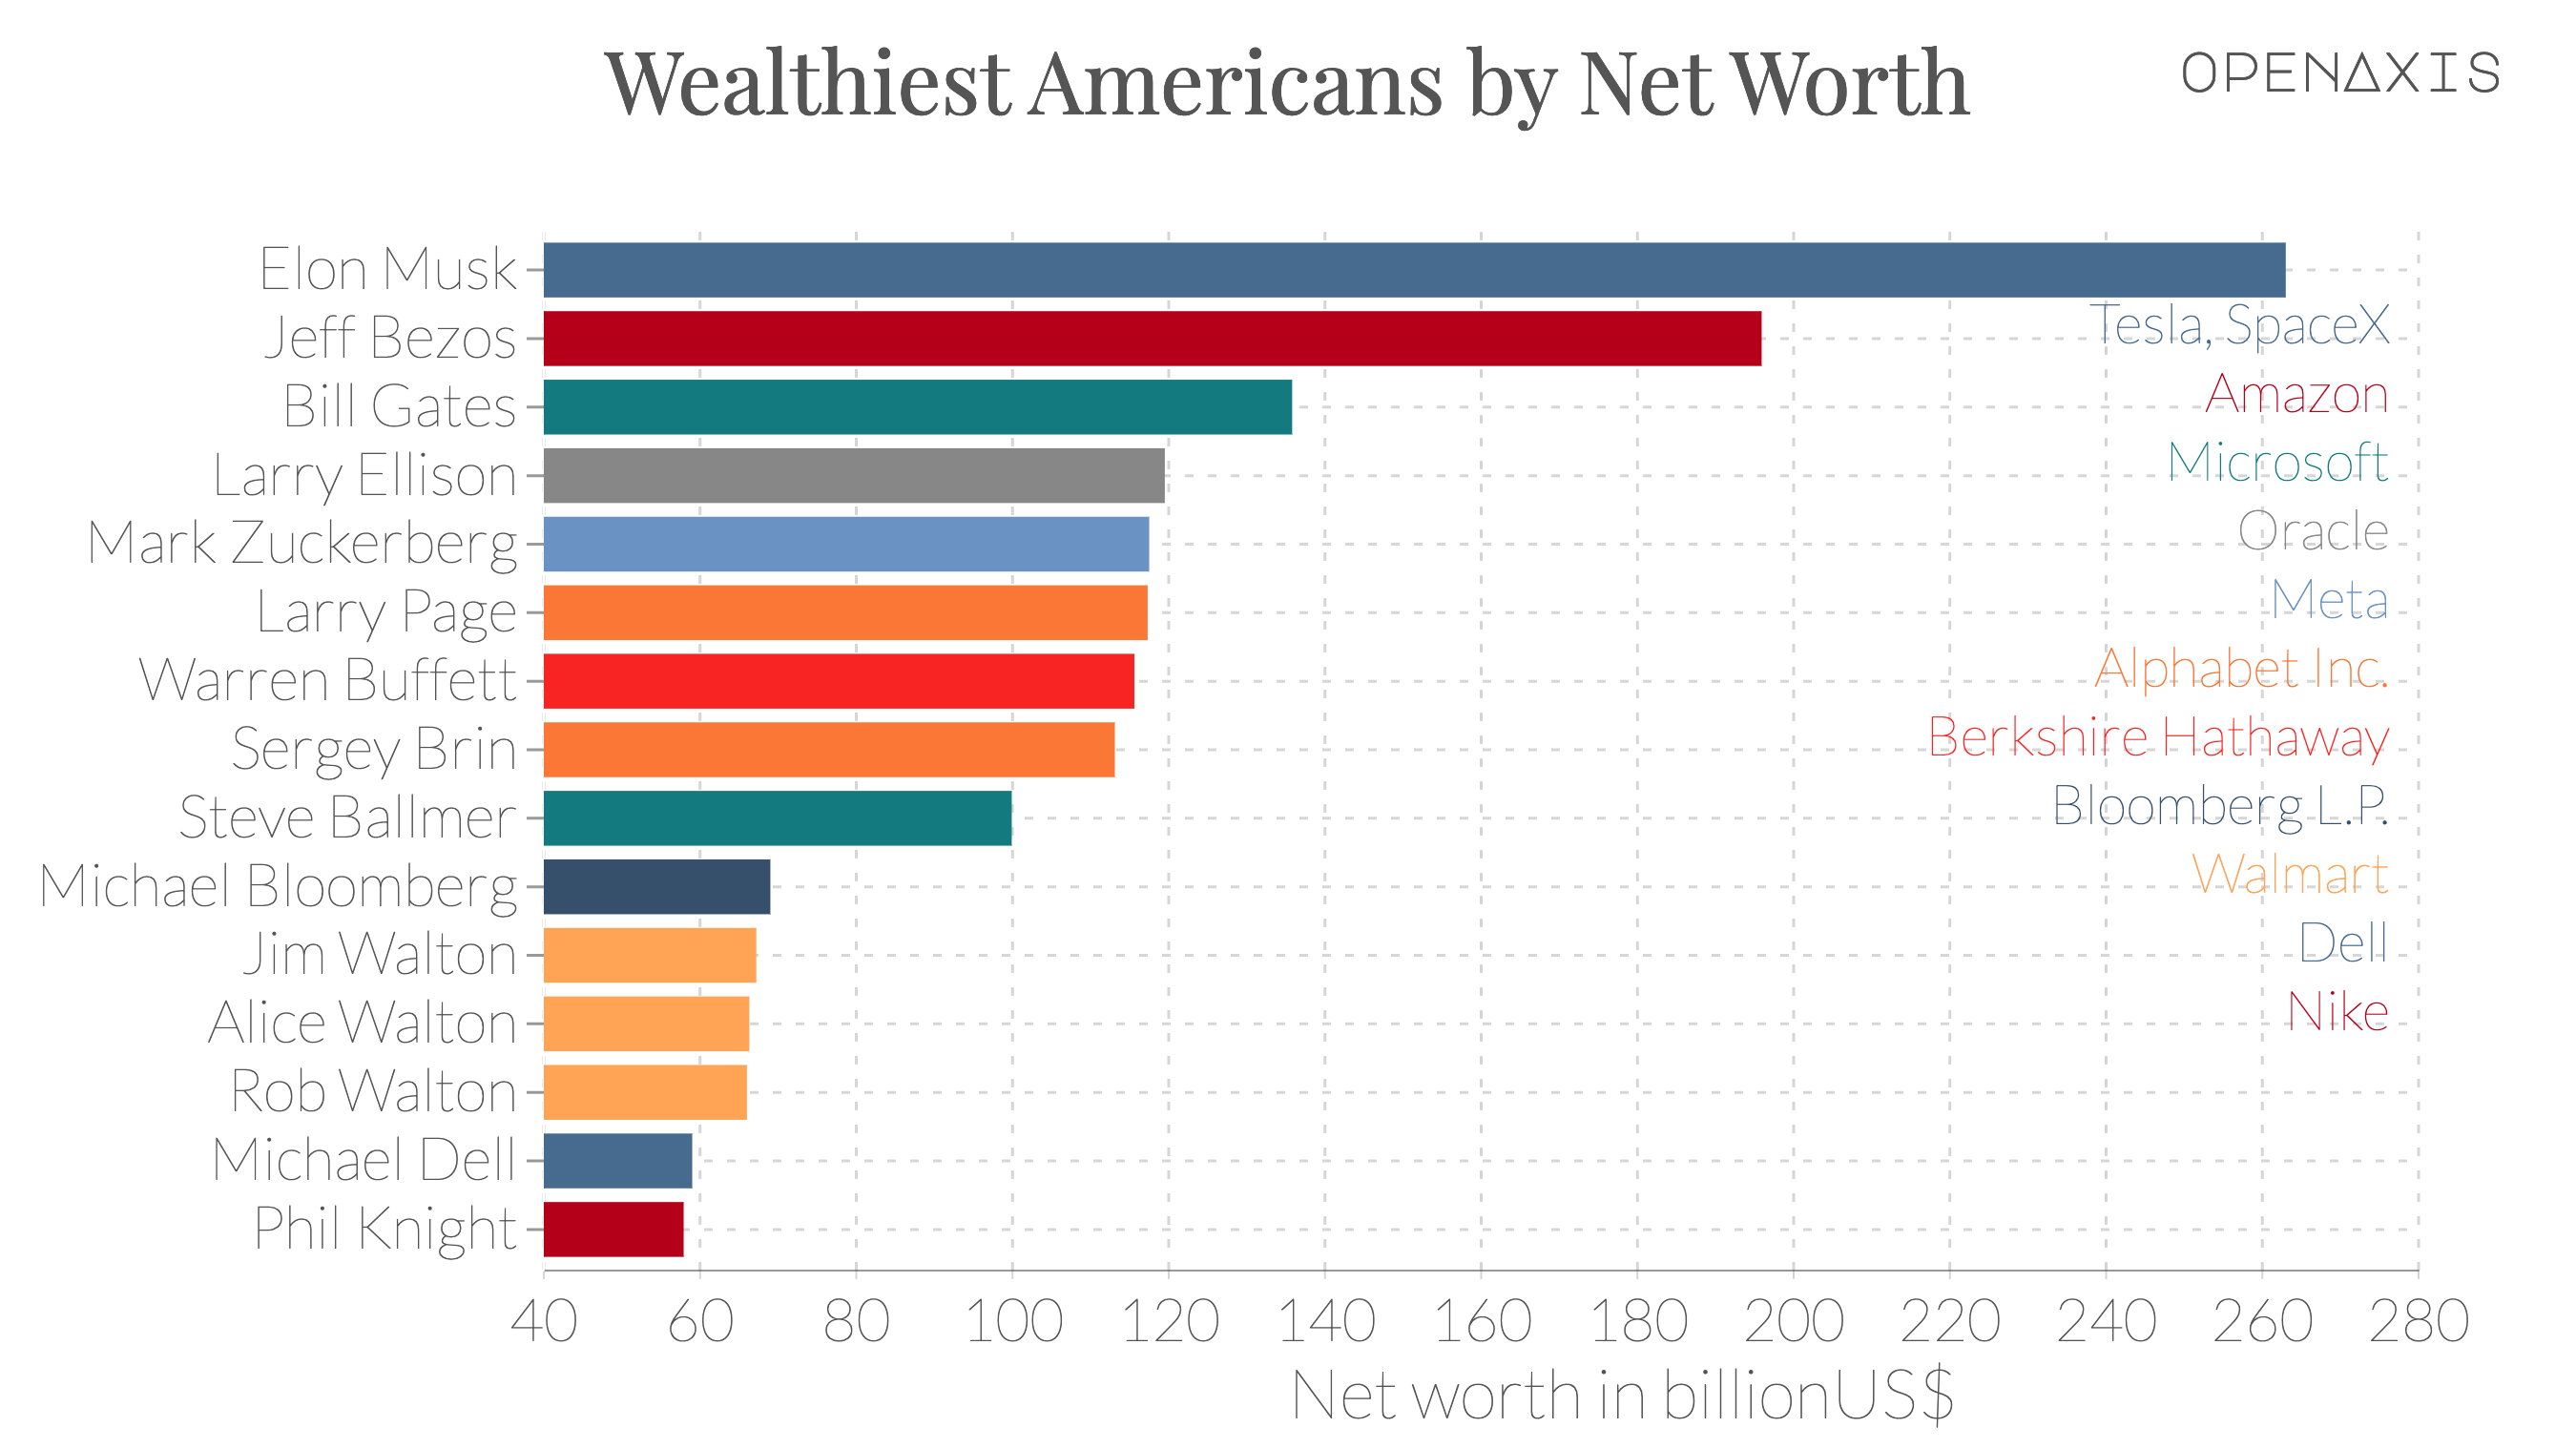 "Wealthiest Americans by Net Worth"